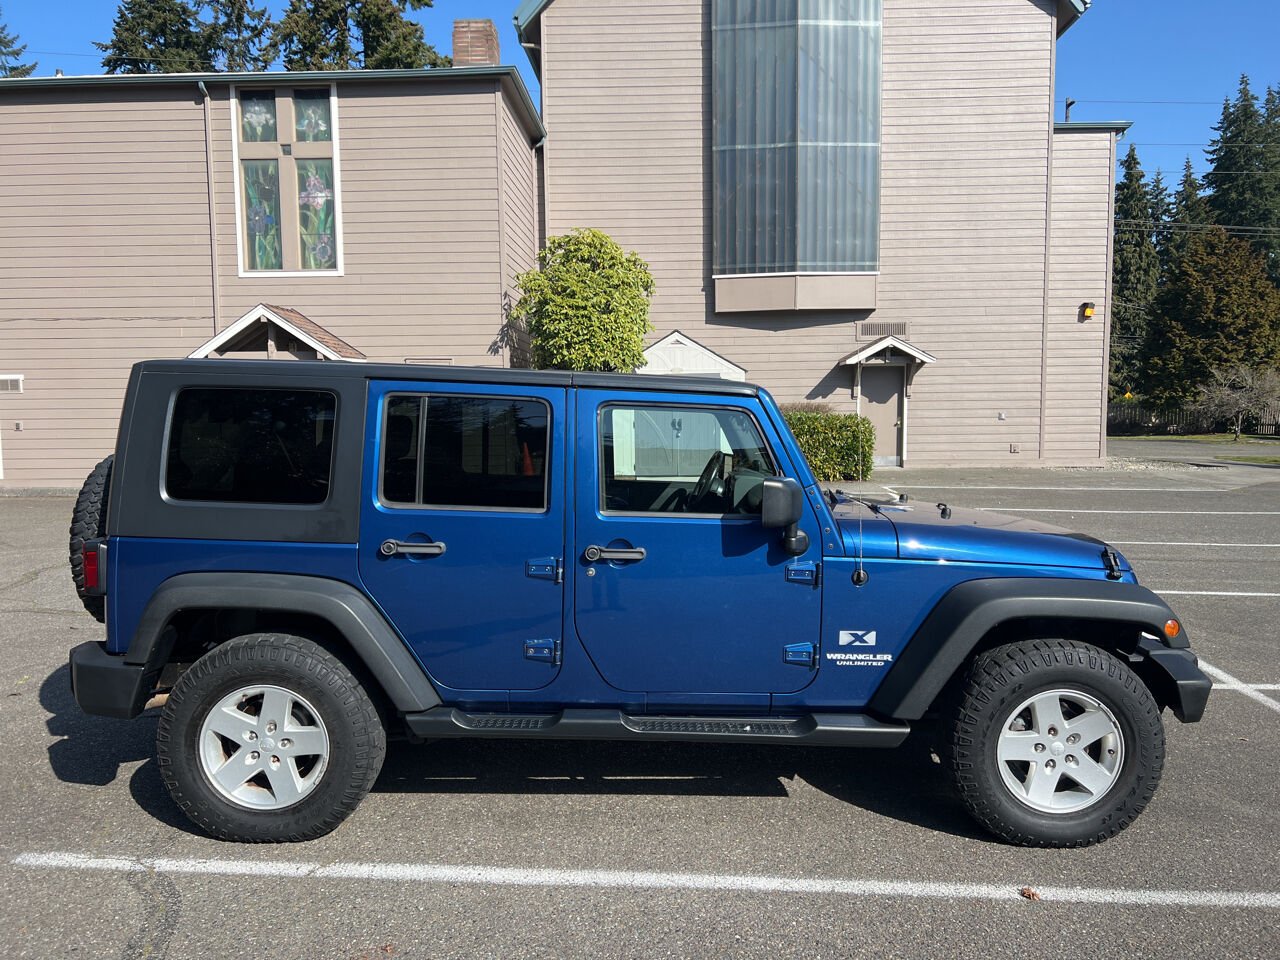 2009 Jeep Wrangler Unlimited For Sale - Carsforsale.com®